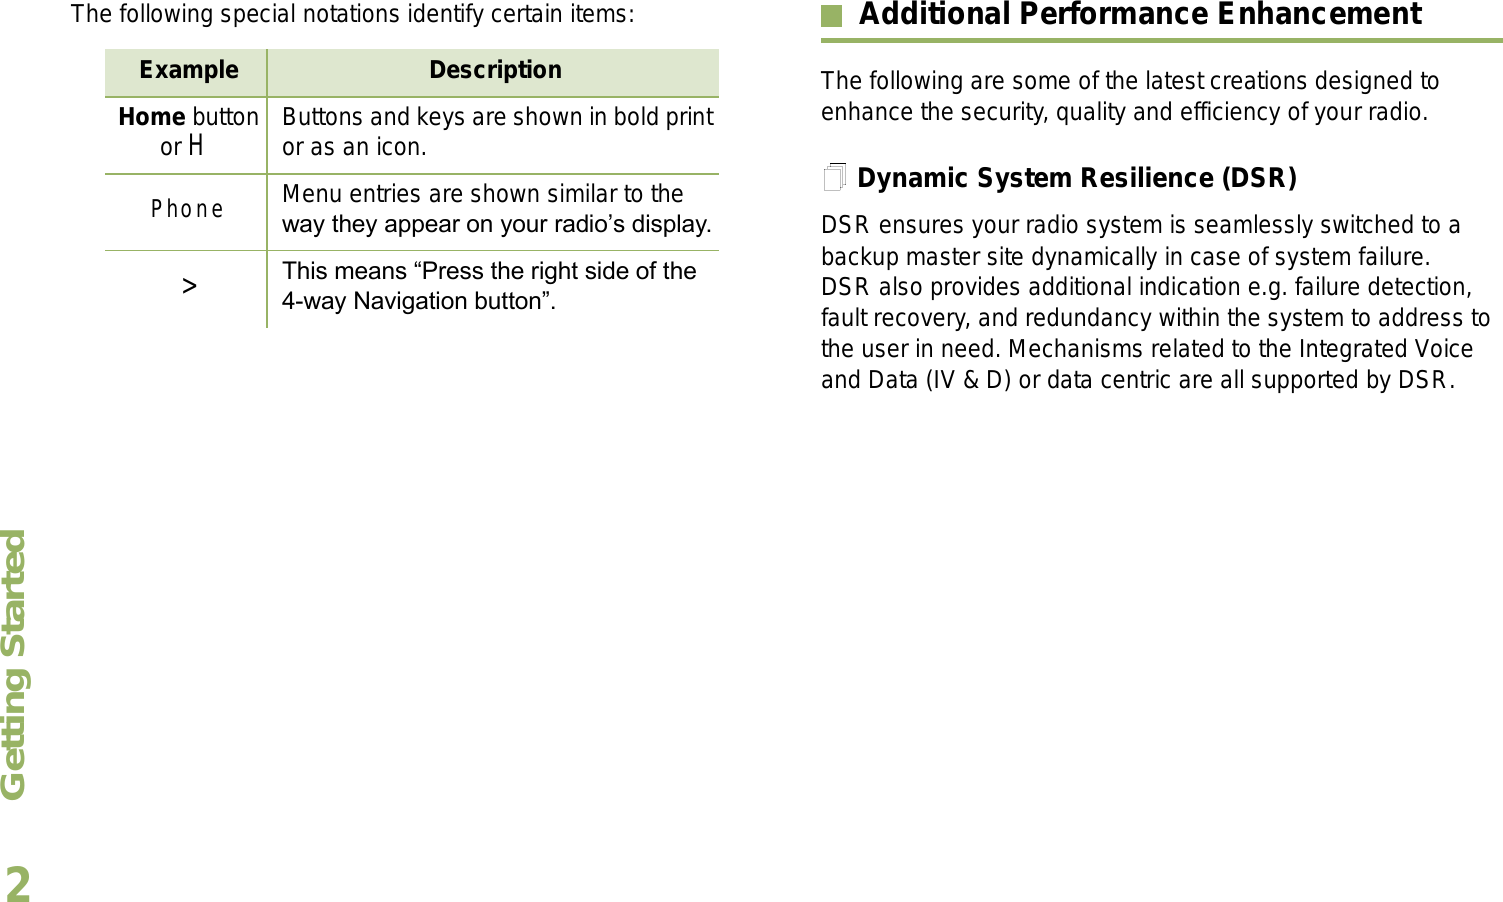 Getting StartedEnglish2The following special notations identify certain items: Additional Performance EnhancementThe following are some of the latest creations designed to enhance the security, quality and efficiency of your radio.Dynamic System Resilience (DSR)DSR ensures your radio system is seamlessly switched to a backup master site dynamically in case of system failure. DSR also provides additional indication e.g. failure detection, fault recovery, and redundancy within the system to address to the user in need. Mechanisms related to the Integrated Voice and Data (IV &amp; D) or data centric are all supported by DSR.Example DescriptionHome button or HButtons and keys are shown in bold print or as an icon.Phone Menu entries are shown similar to the way they appear on your radios display.&gt;This means Press the right side of the 4-way Navigation button.